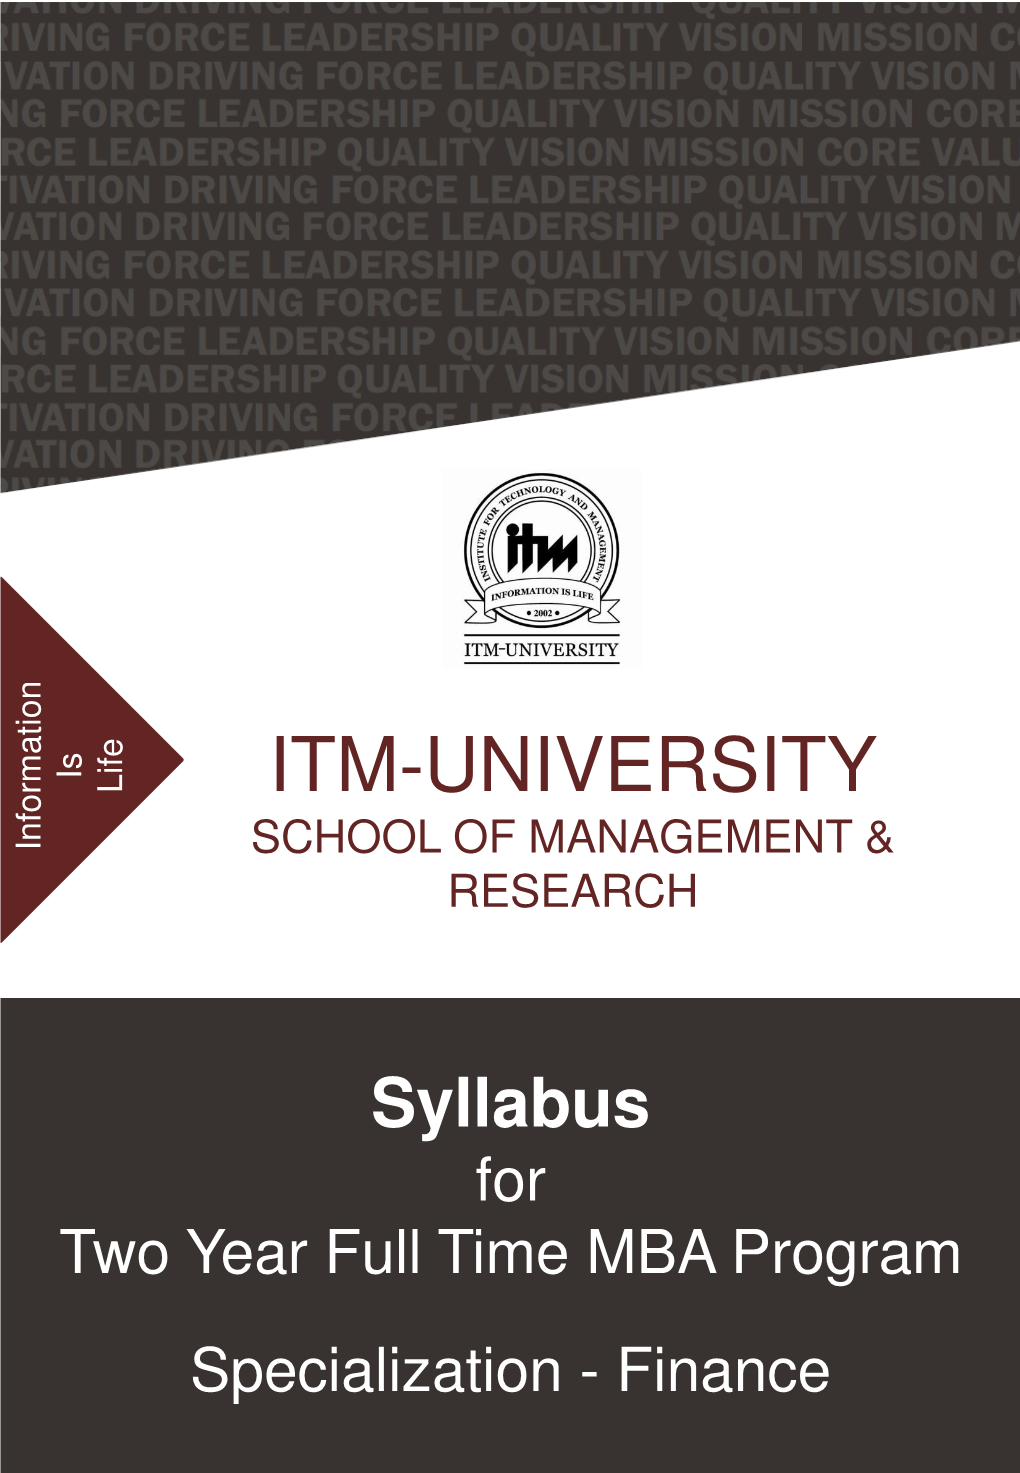 Syllabus for Two Year Full Time MBA Program